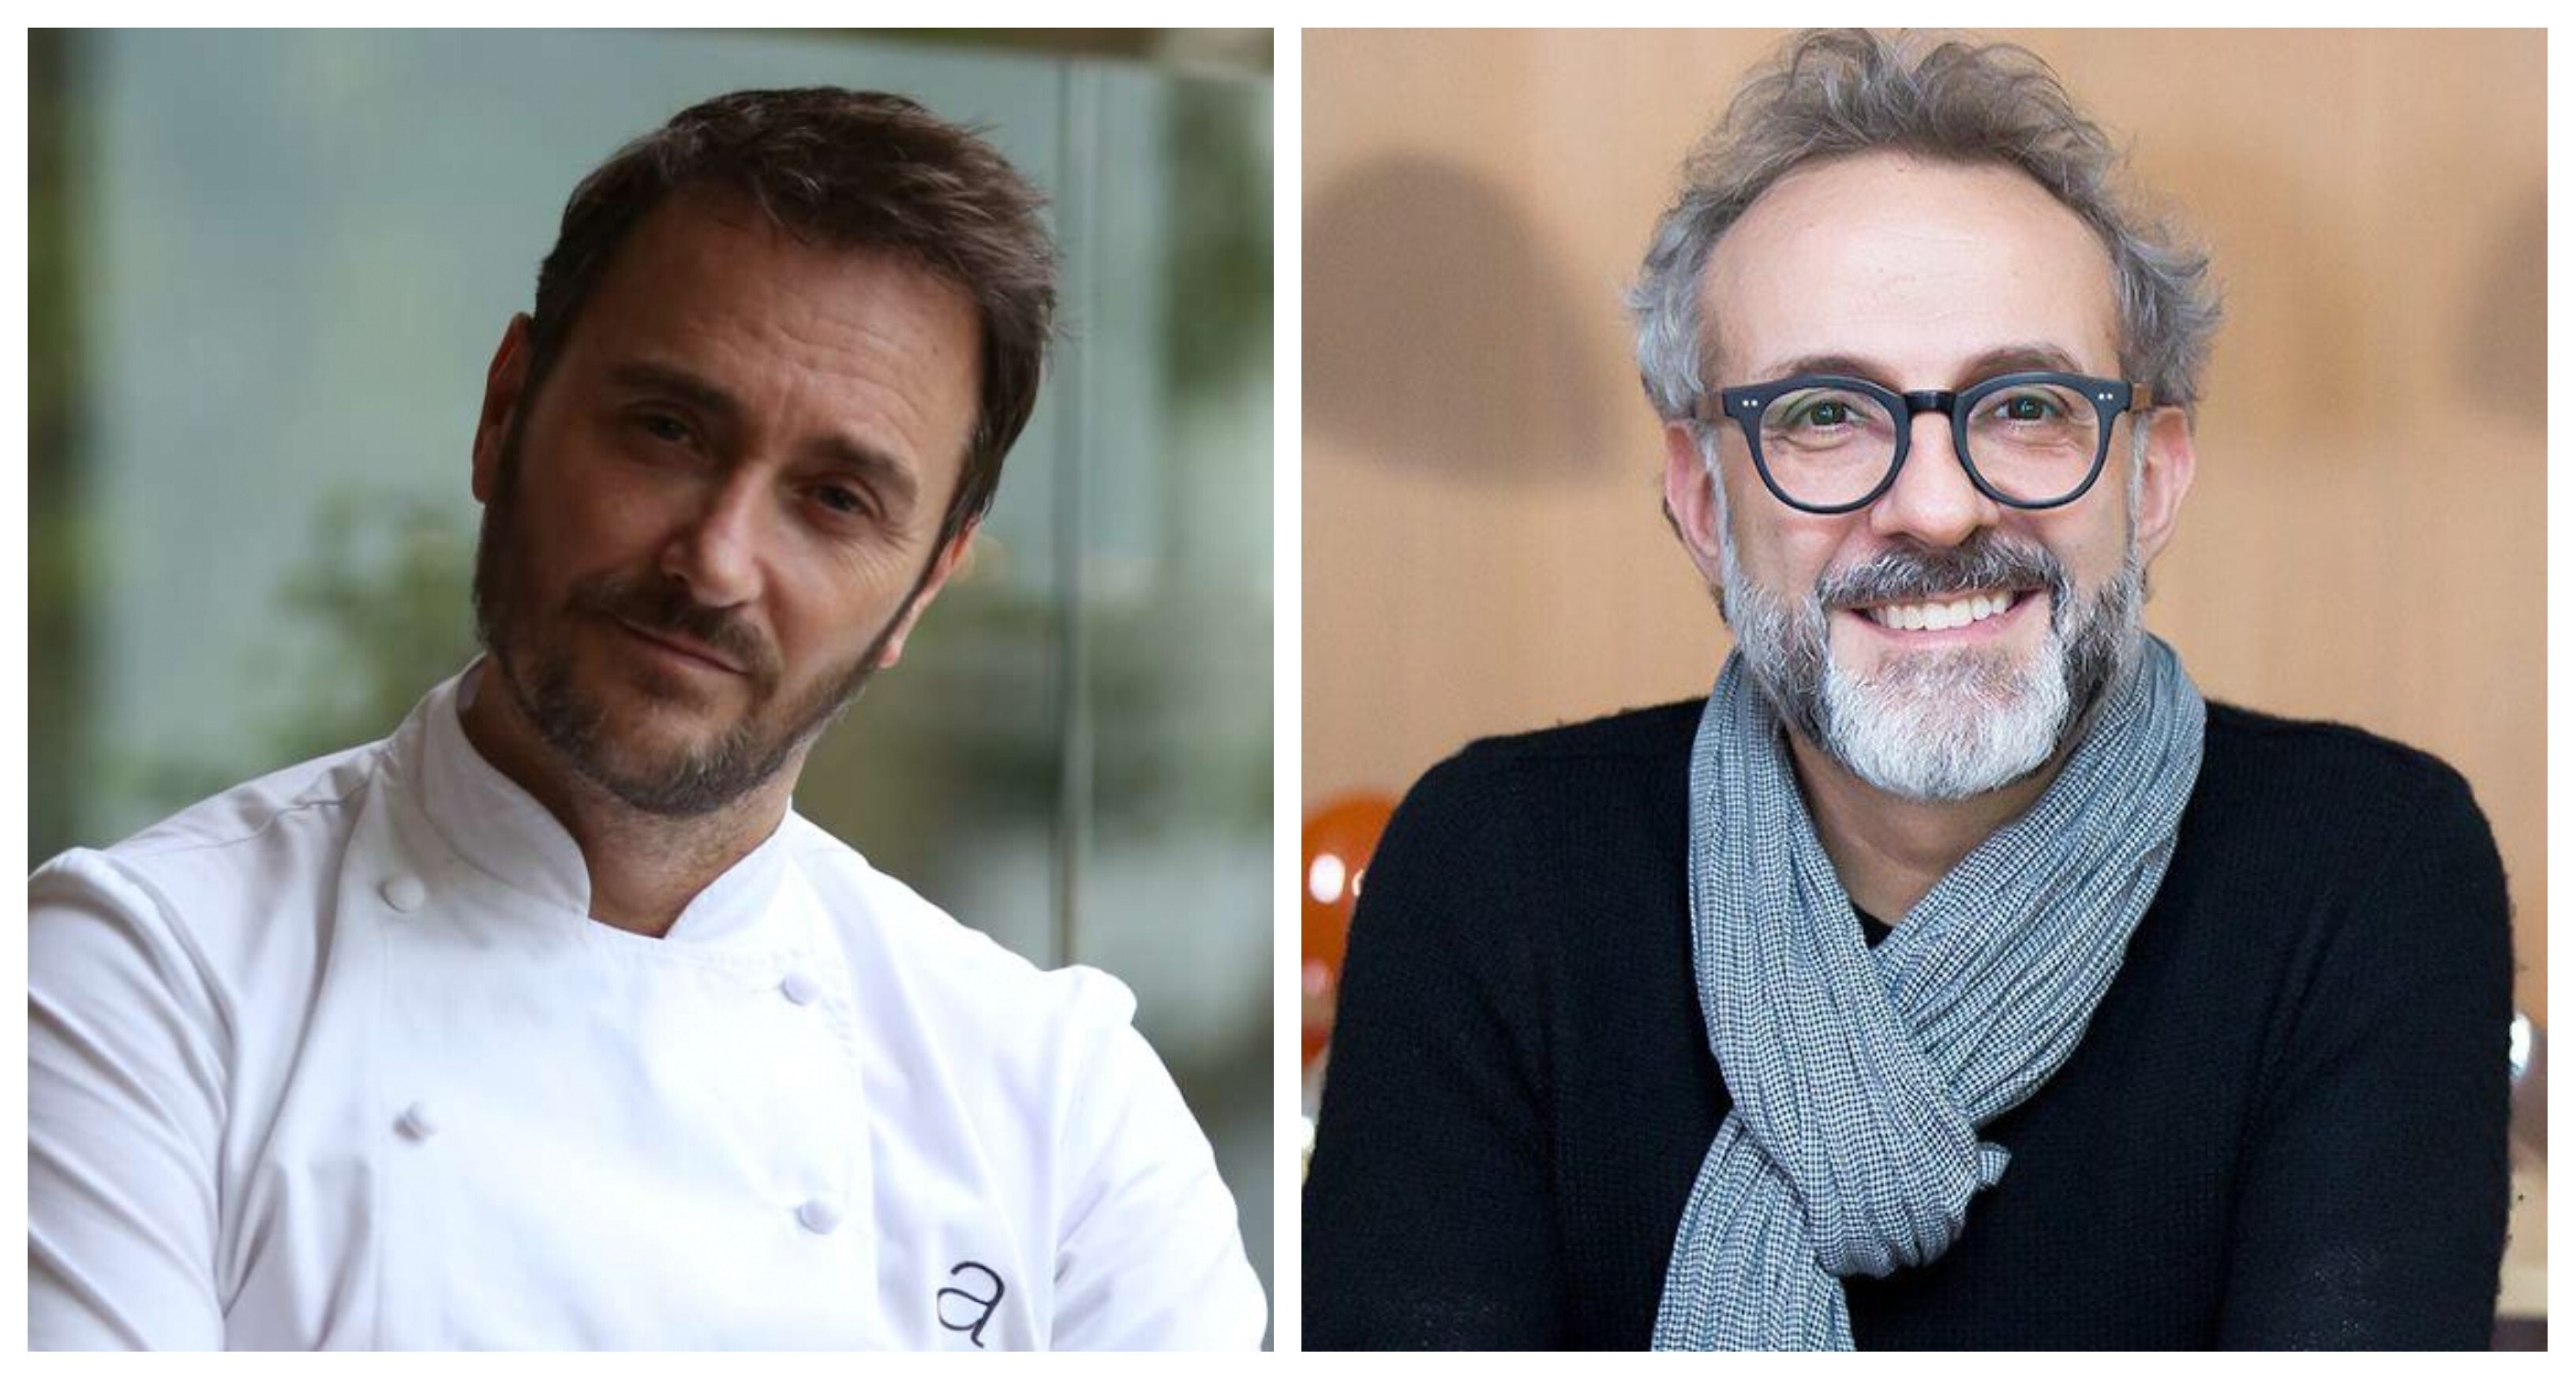 With coronavirus lockdown still in force in many parts of the world, Jason Atherton (left) and Massimo Bottura have taken to social media to highlight their culinary skills and teach others. Photos: Instagram